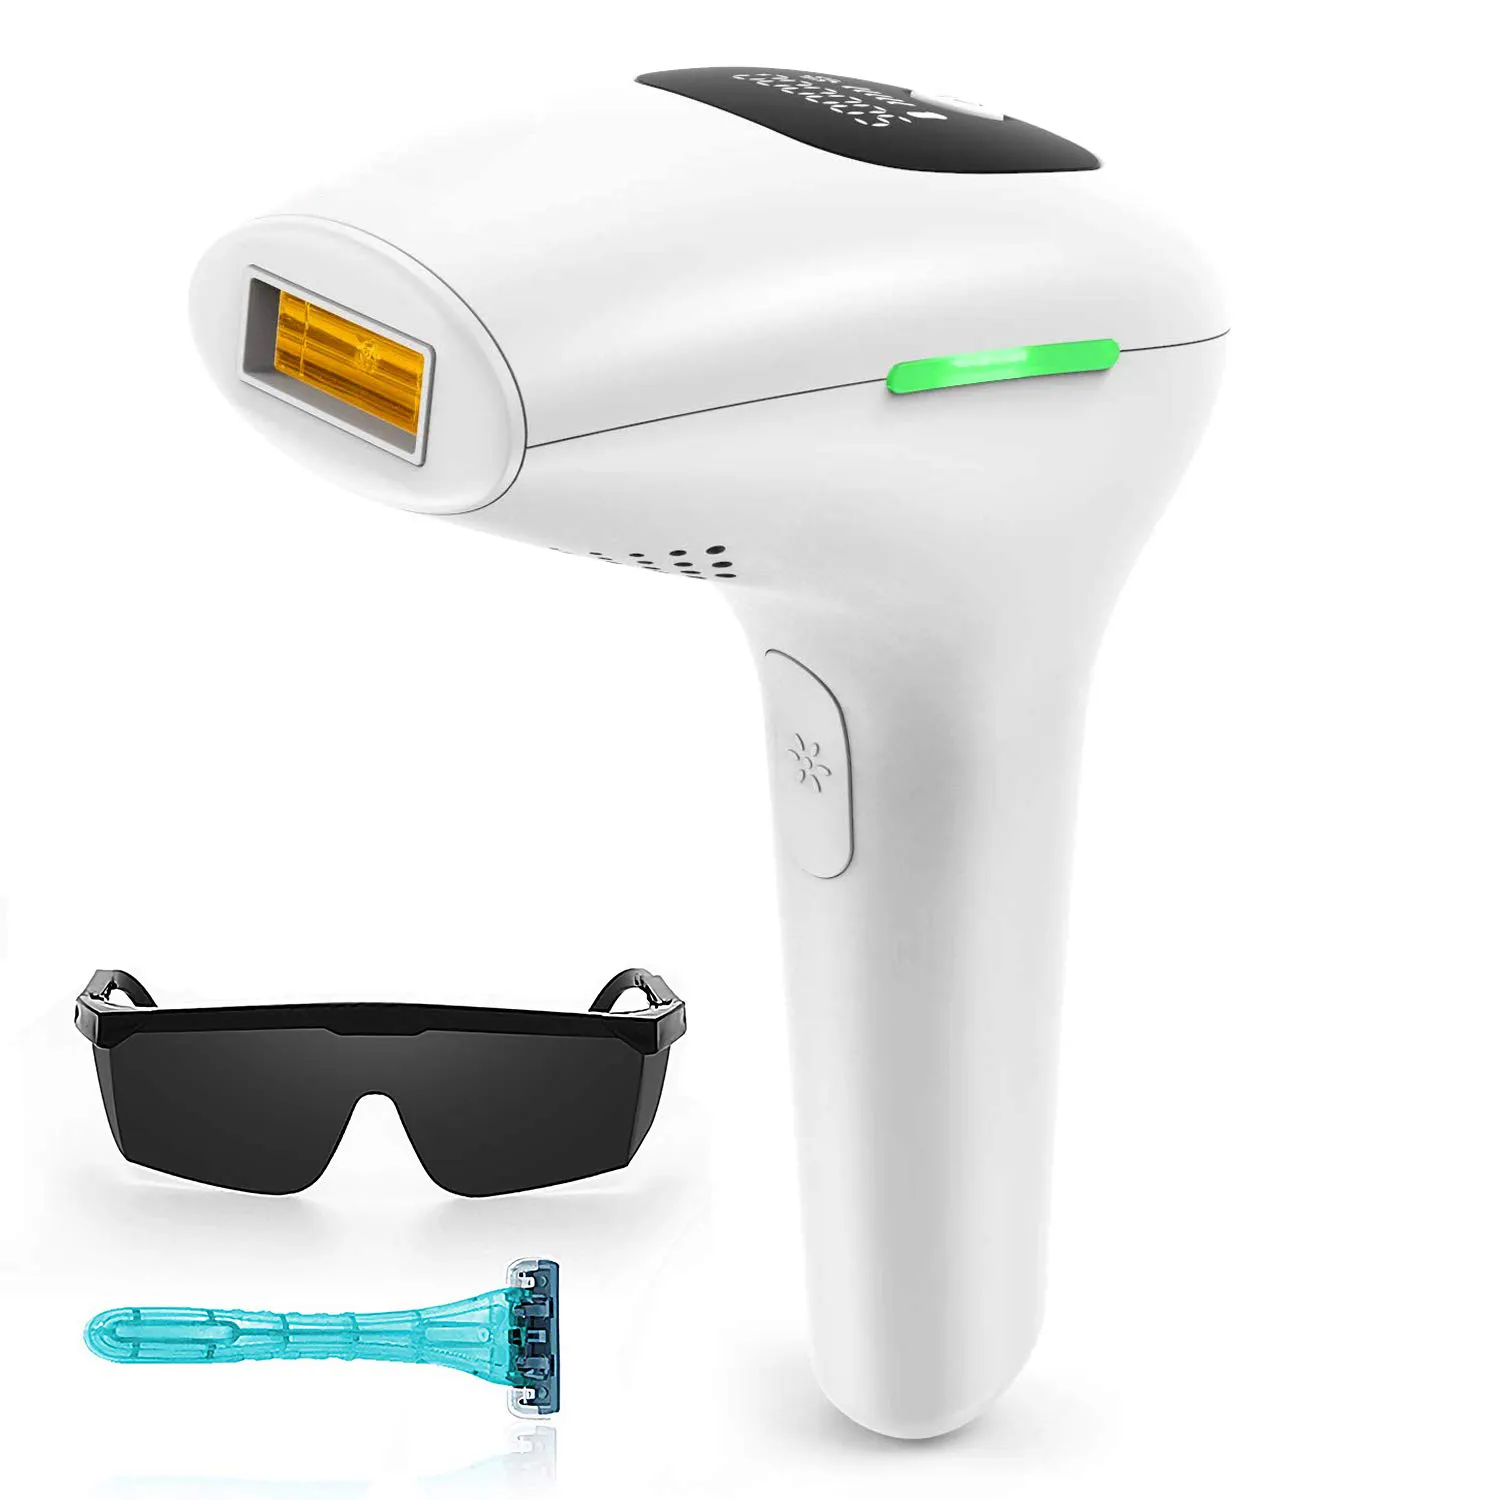 Handheld Painless Laser Ipl Hair Removal 900000 Flashes Permanent Laser IPL Hair Removal Appliances Home Use